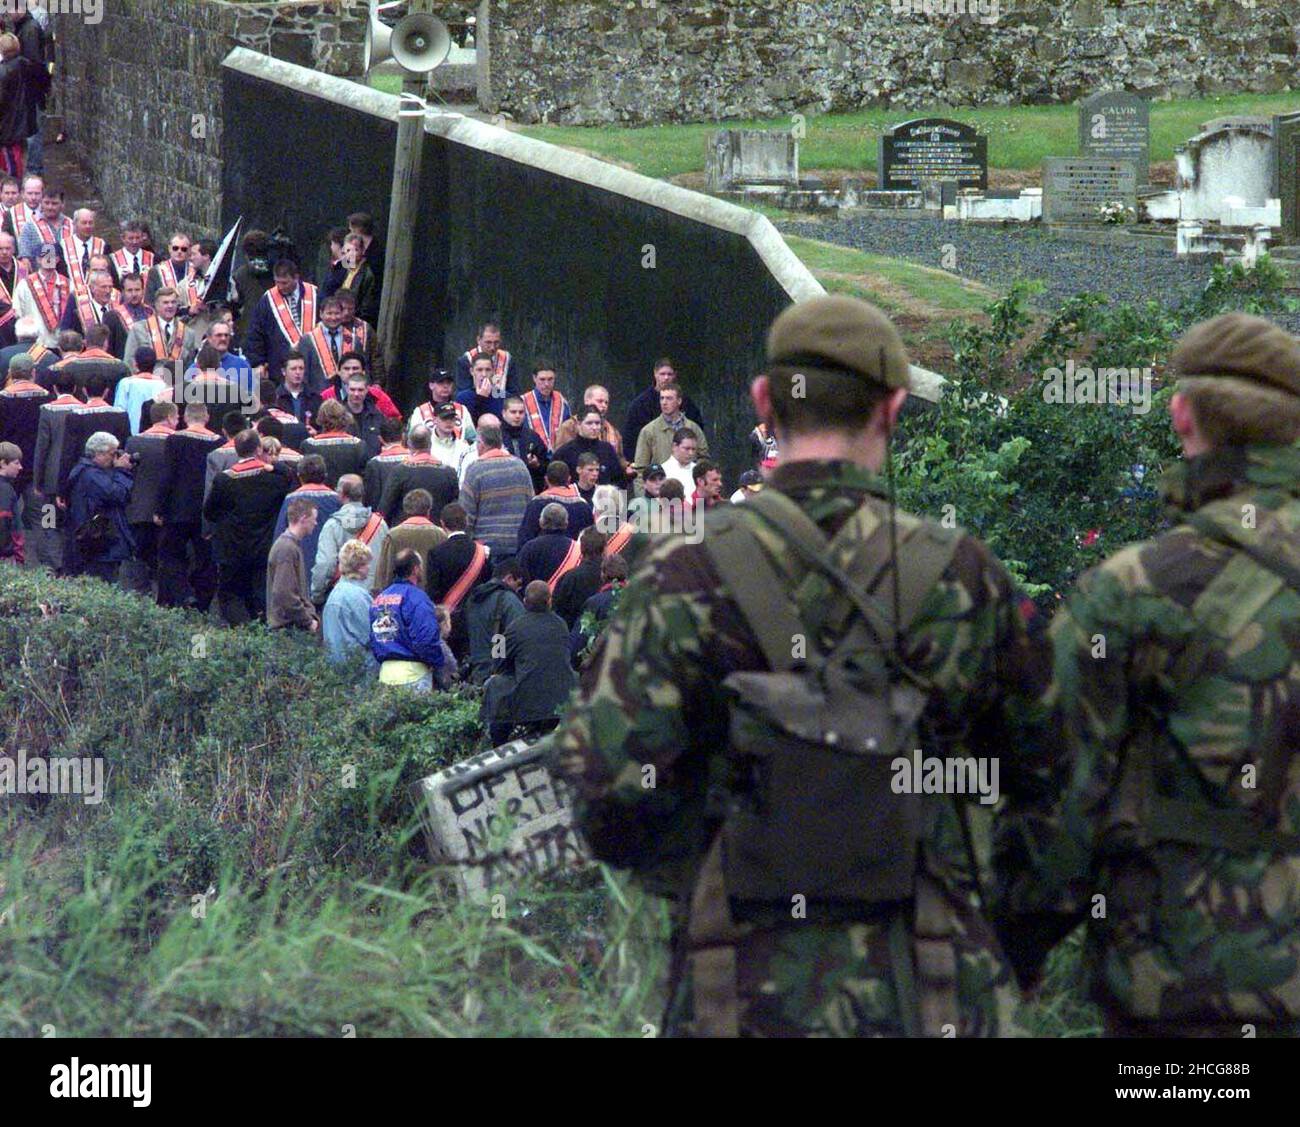 File photo dated 13/07/98 of soldiers watching as the Portadown District No 1 Orangemen marched past Drumcree Church and back from the barricaded road. Prime Minister Tony Blair told the head of the Orange Order to call for an immediate end to the Drumcree parading dispute hours after three young brothers were killed in a loyalist firebomb attack, according to newly released documents from the National Archives. Issue date: Wednesday December 29, 2021. Stock Photo